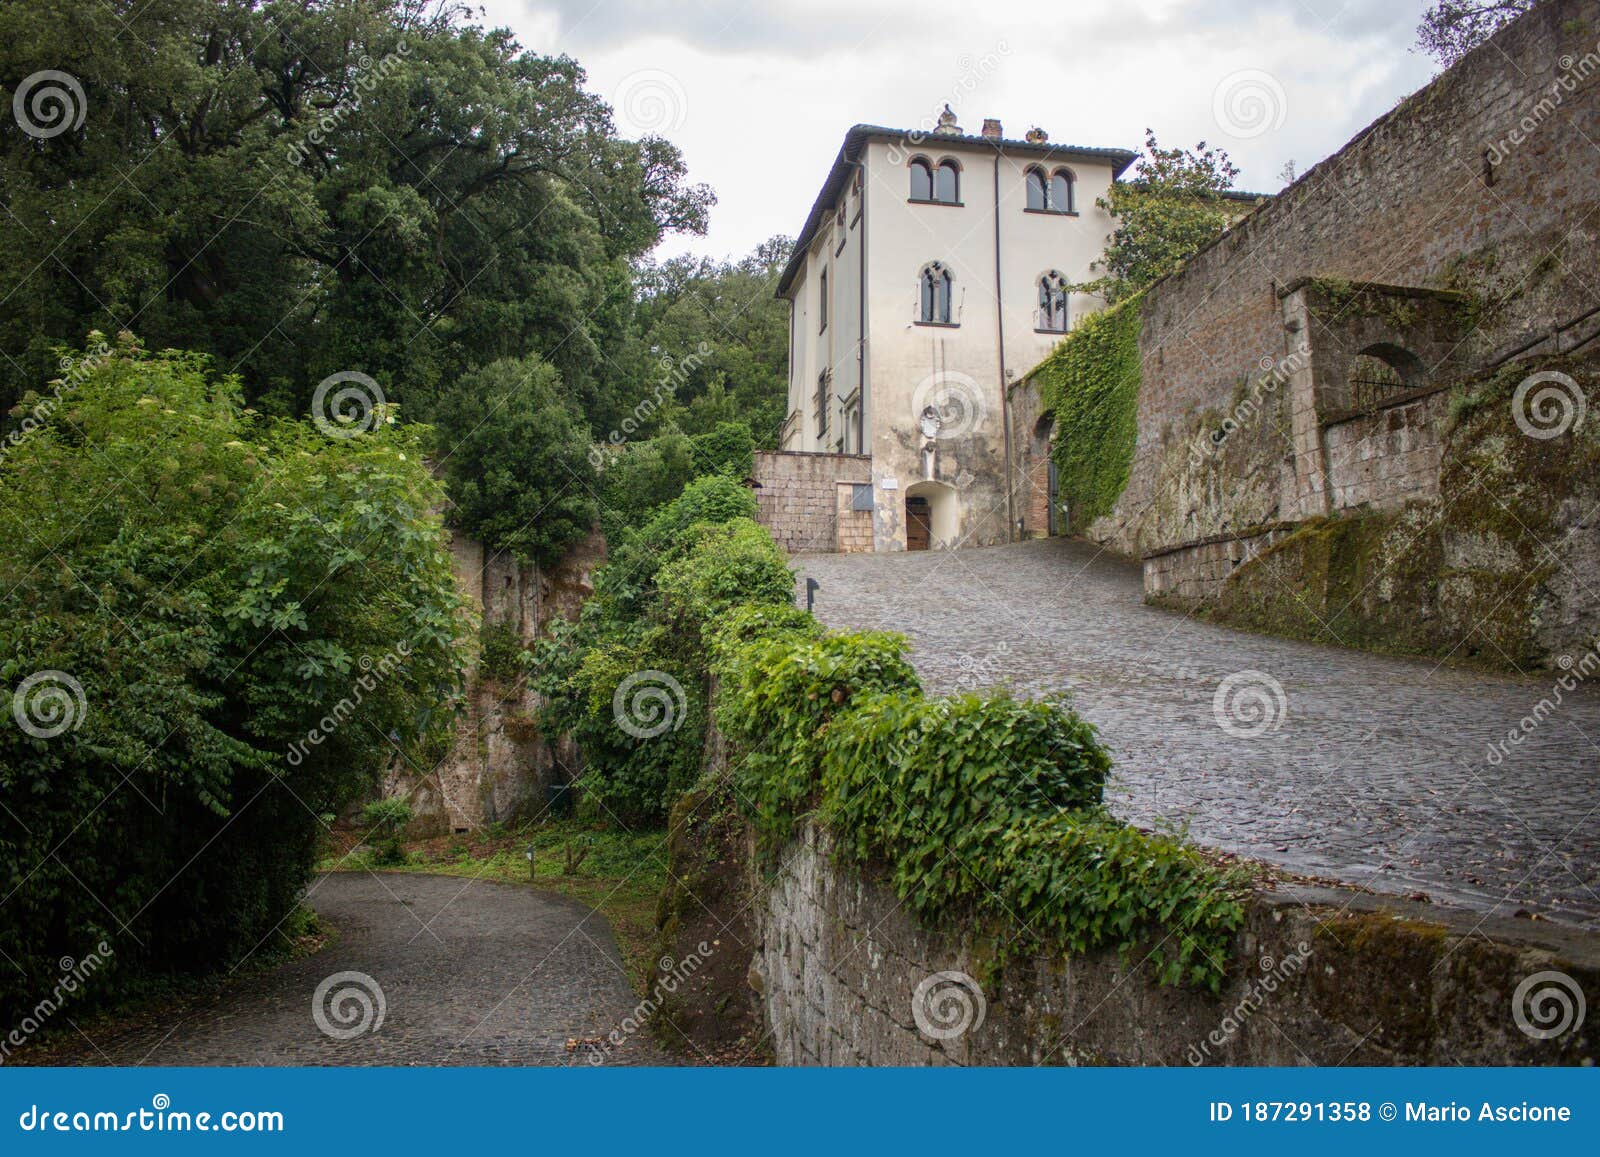 the city of sutri province of viterbo